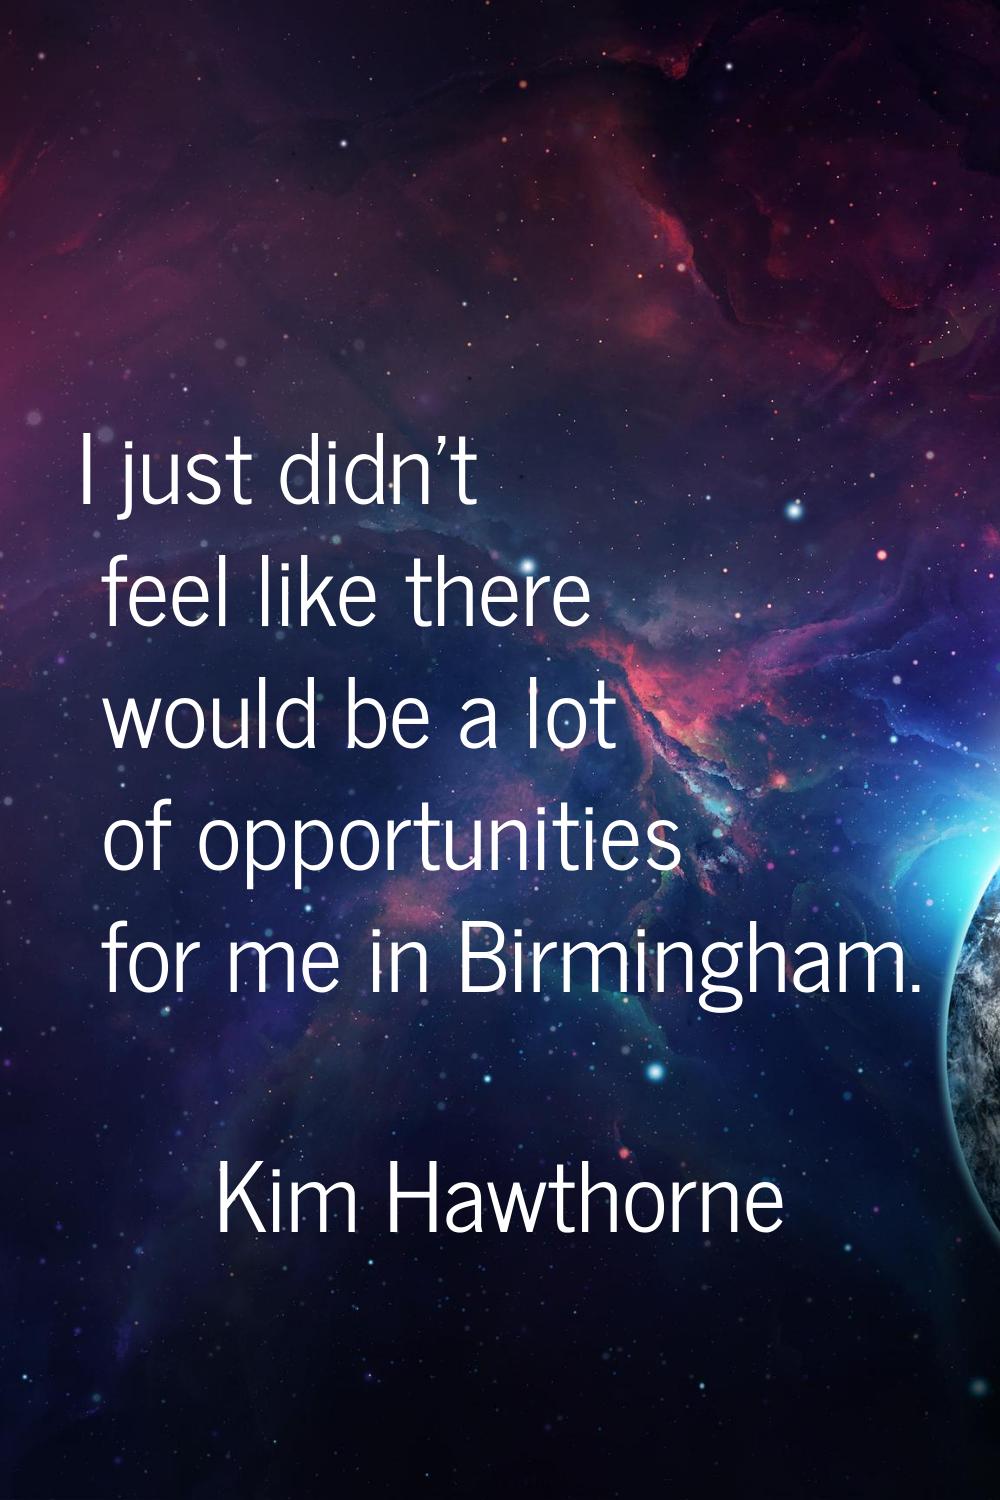 I just didn't feel like there would be a lot of opportunities for me in Birmingham.